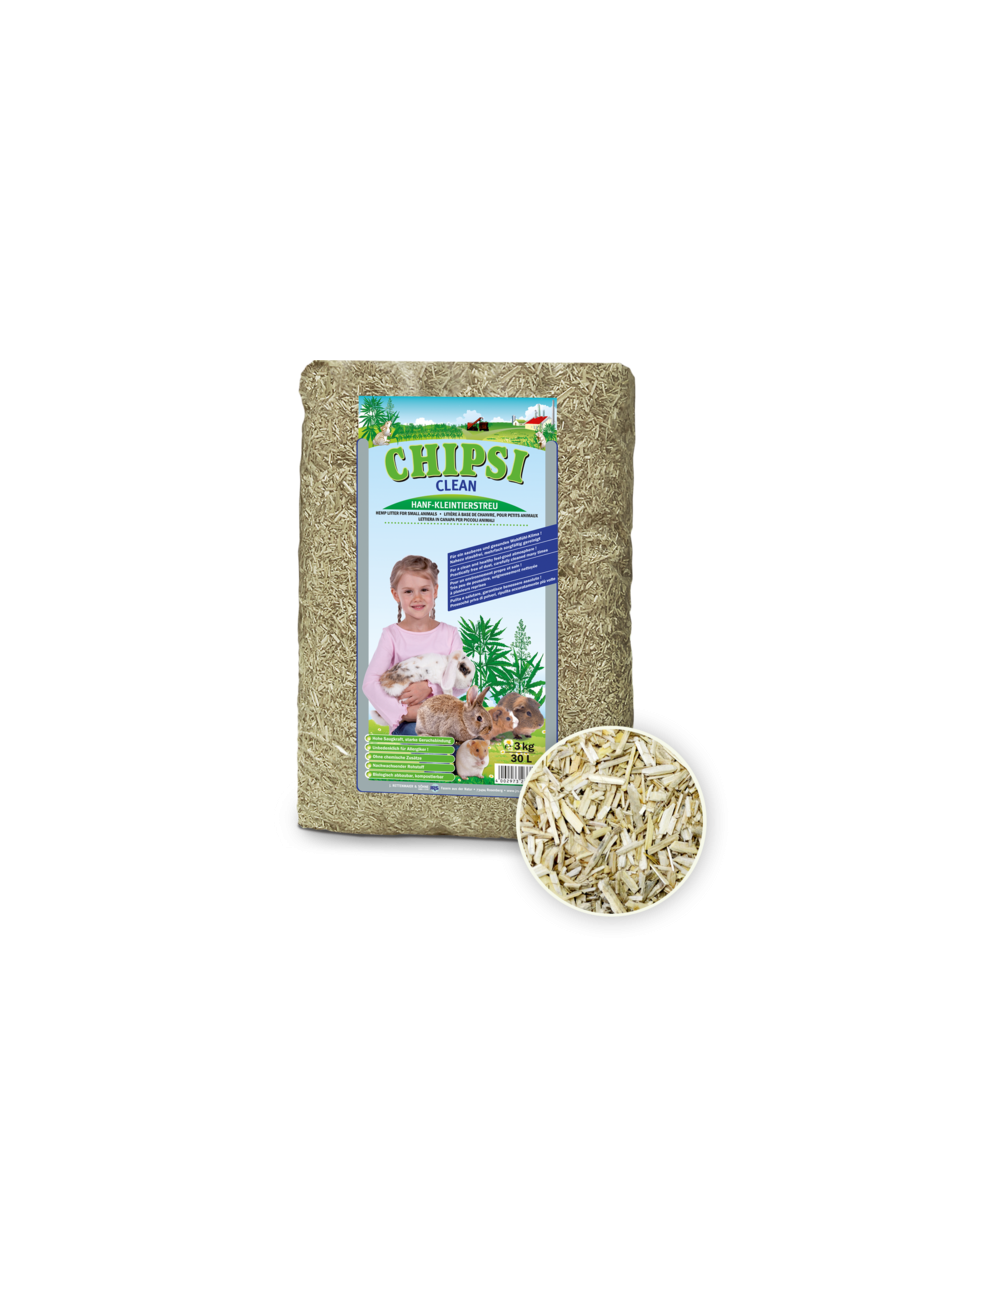 CHIPSI - Clean - Hemp litter for rabbits and rodents